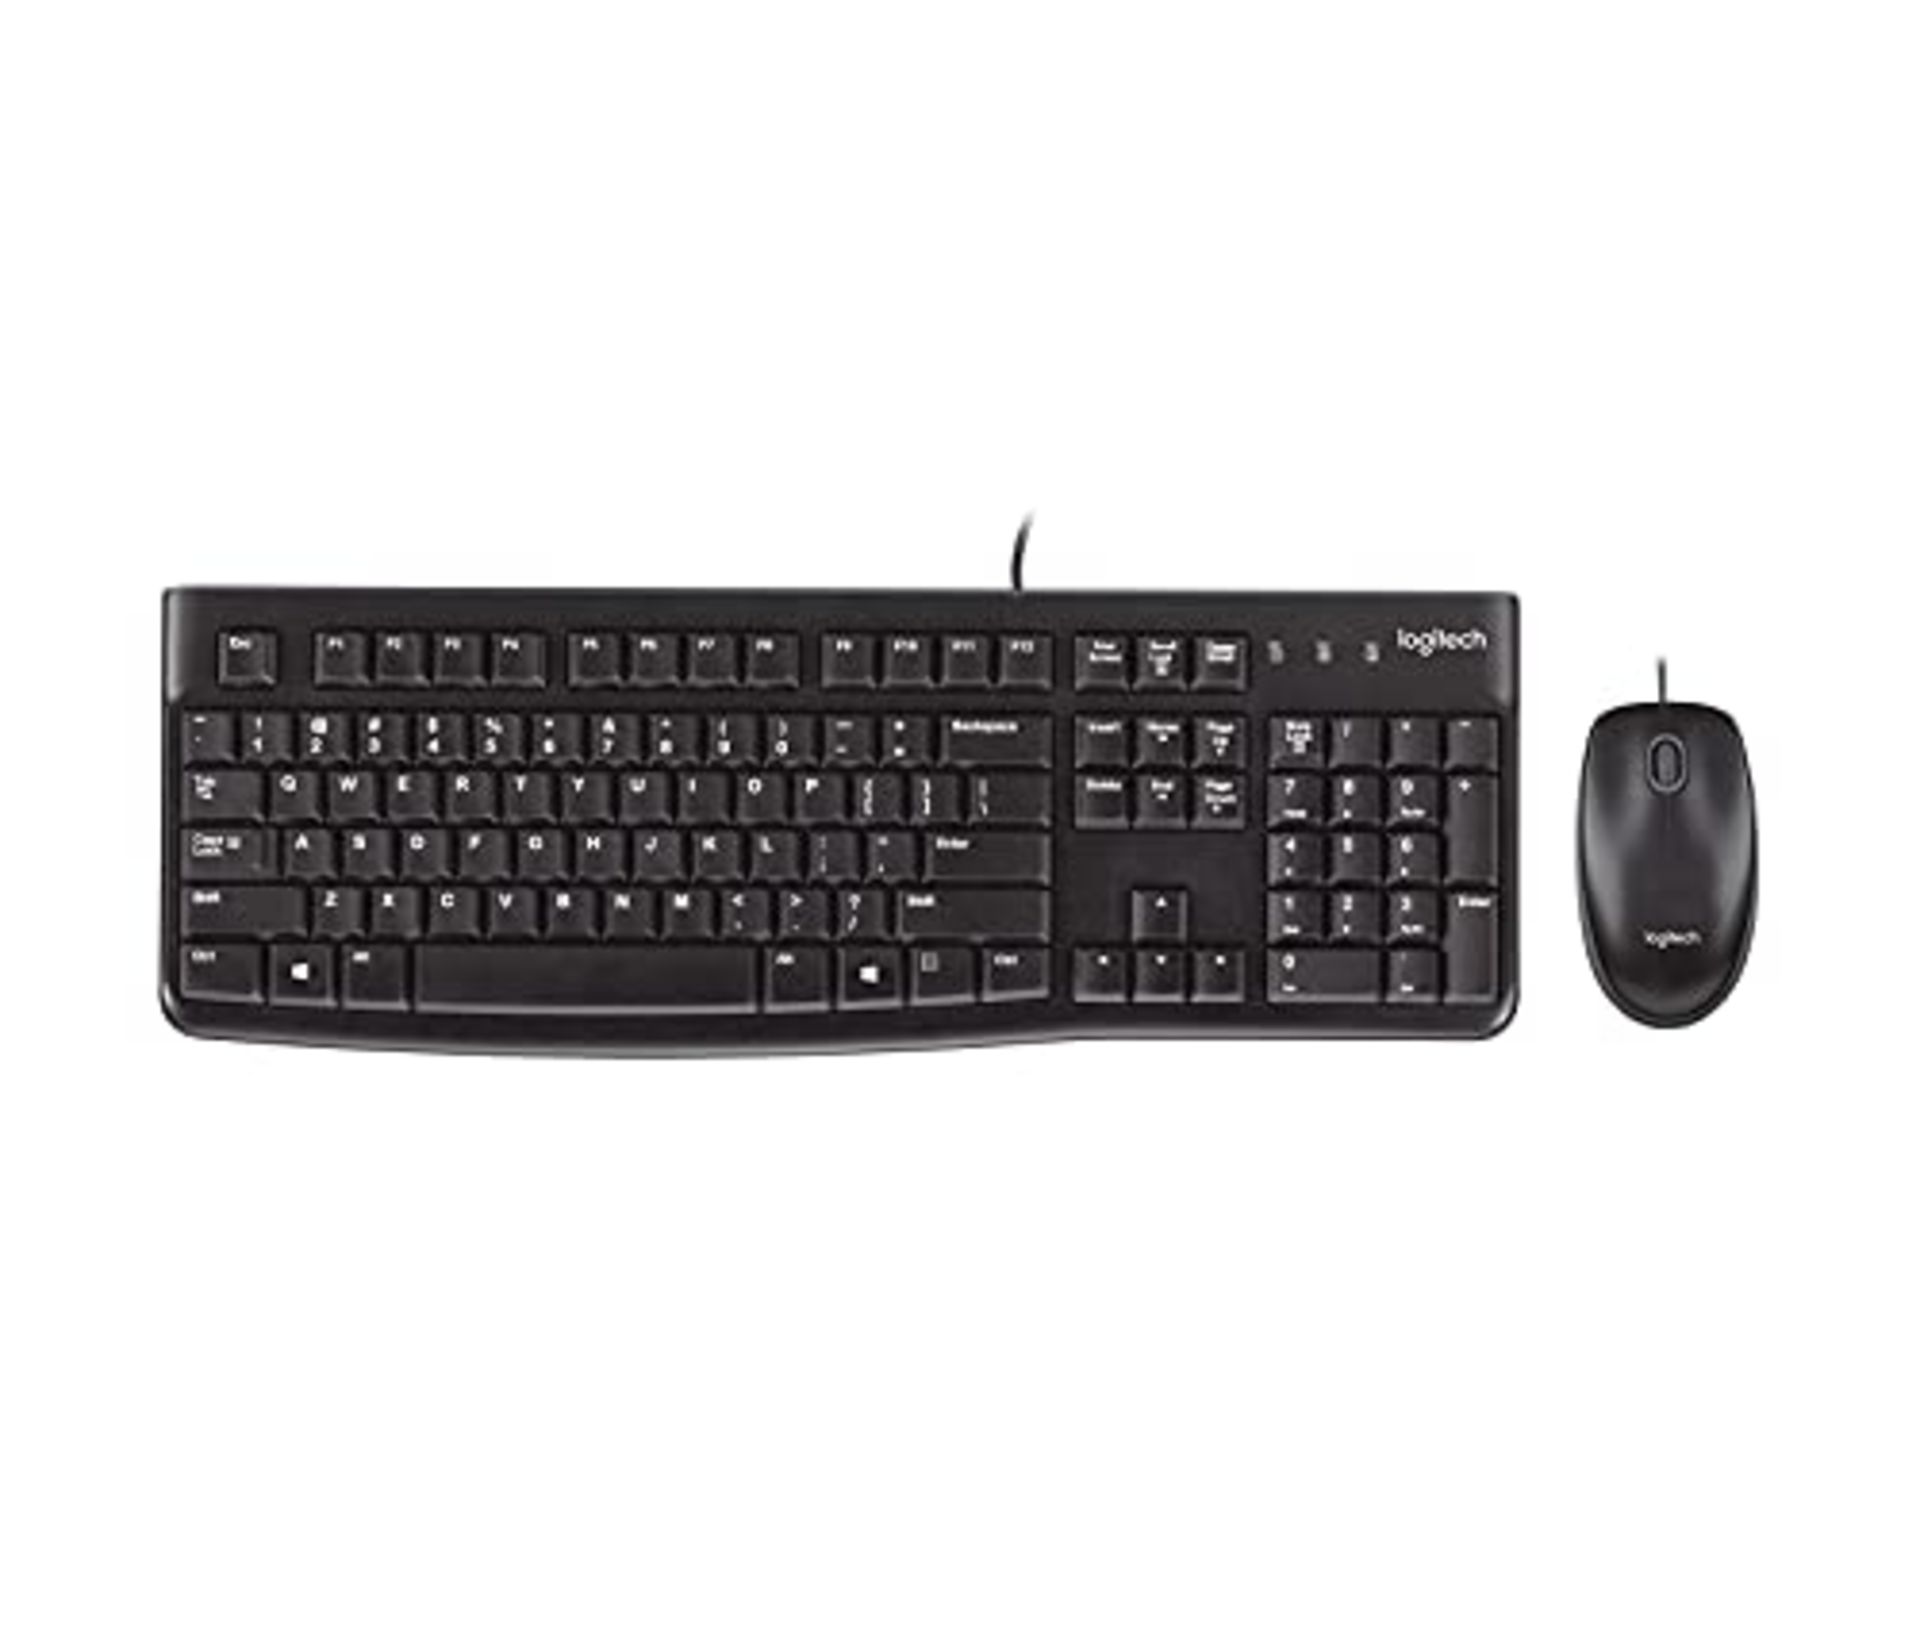 [INCOMPLETE] Logitech MK120 Wired Keyboard and Mouse for Windows, Optical Wired Mouse,